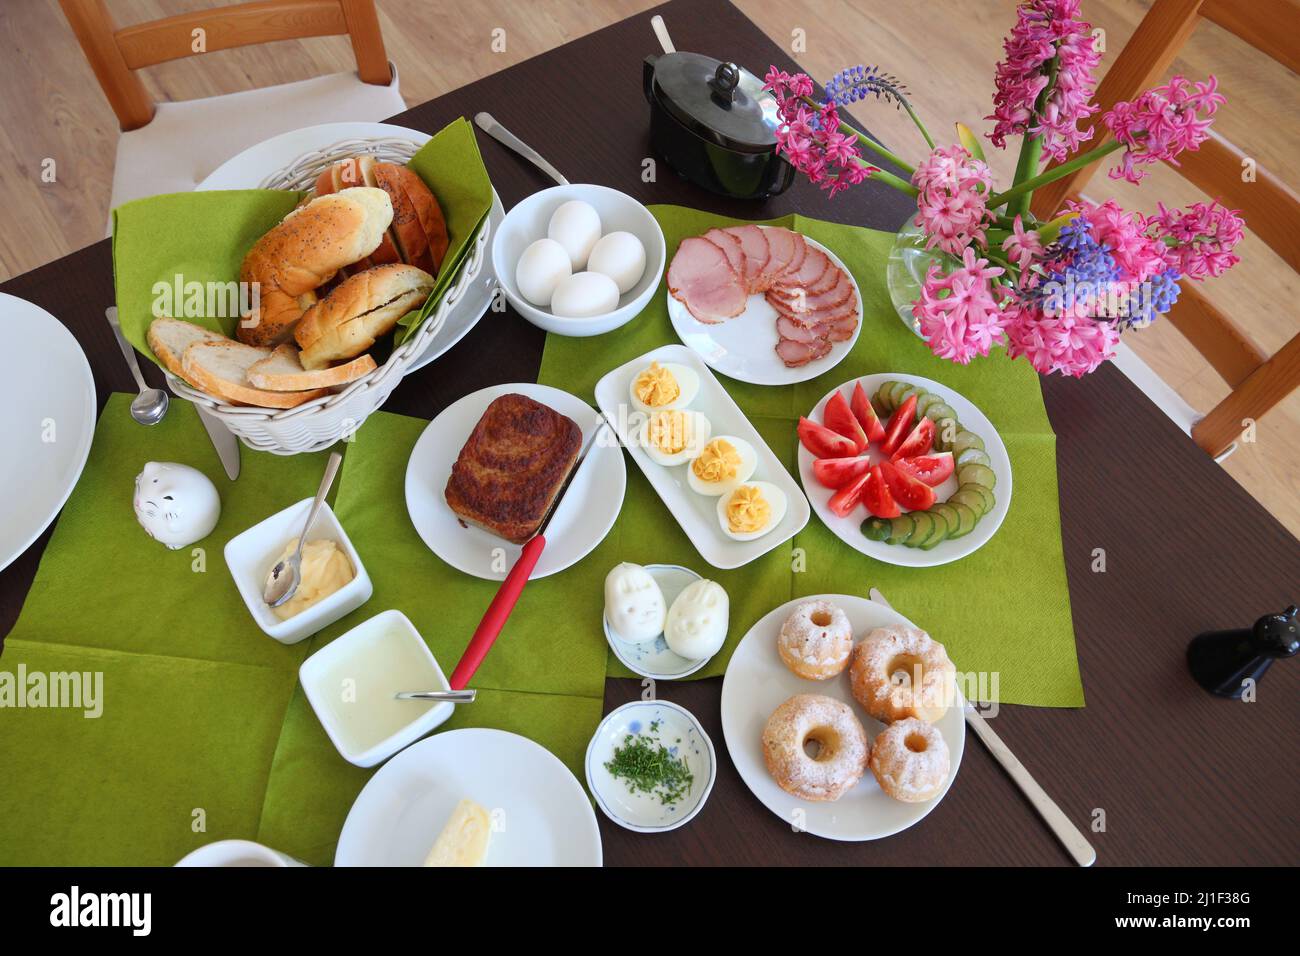 Easter breakfast table in Poland. Easter foods in Europe. Easter in Poland - Wielkanoc. Stock Photo